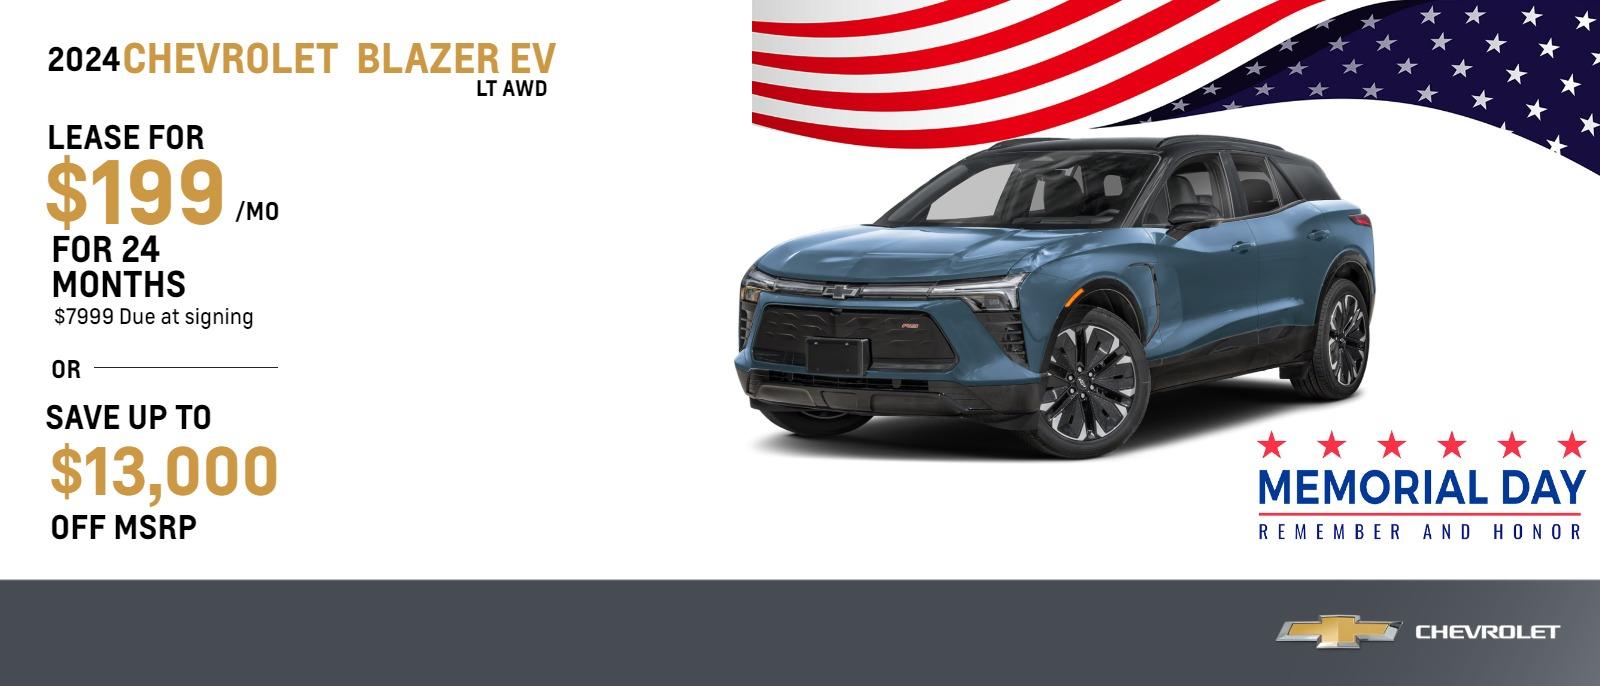 2024 Chevrolet Blazer EV LT AWD
$199 Month Lease | 24 Months | $7999 Due at signing
OFFER = Save up to $13,000 OFF MSRP